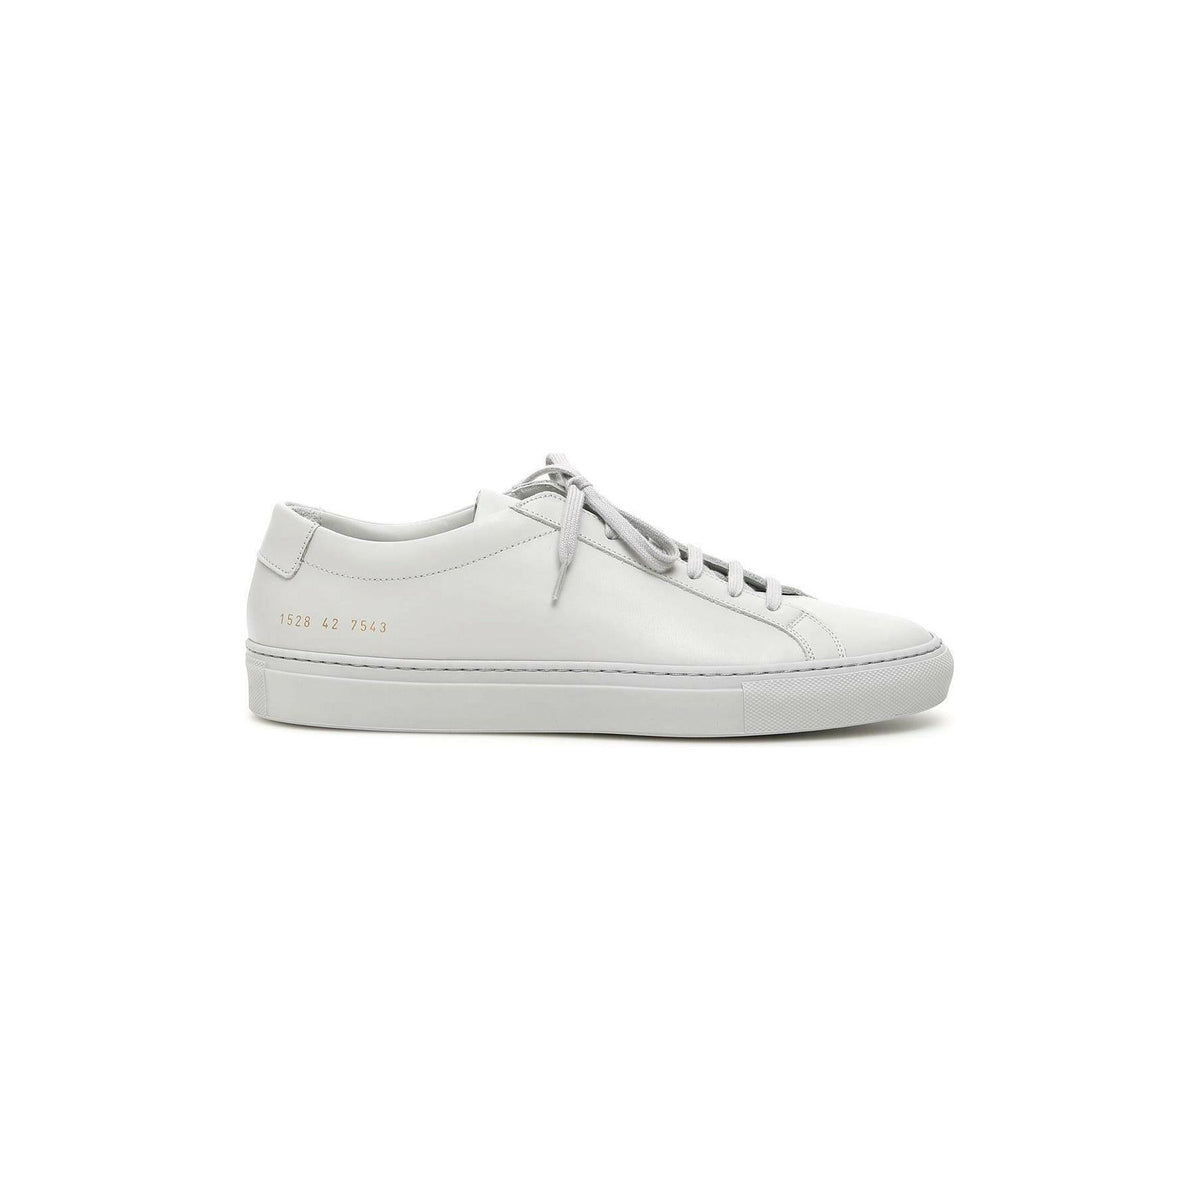 COMMON PROJECTS - Grey Original Achilles Low-Top Leather Sneakers - JOHN JULIA